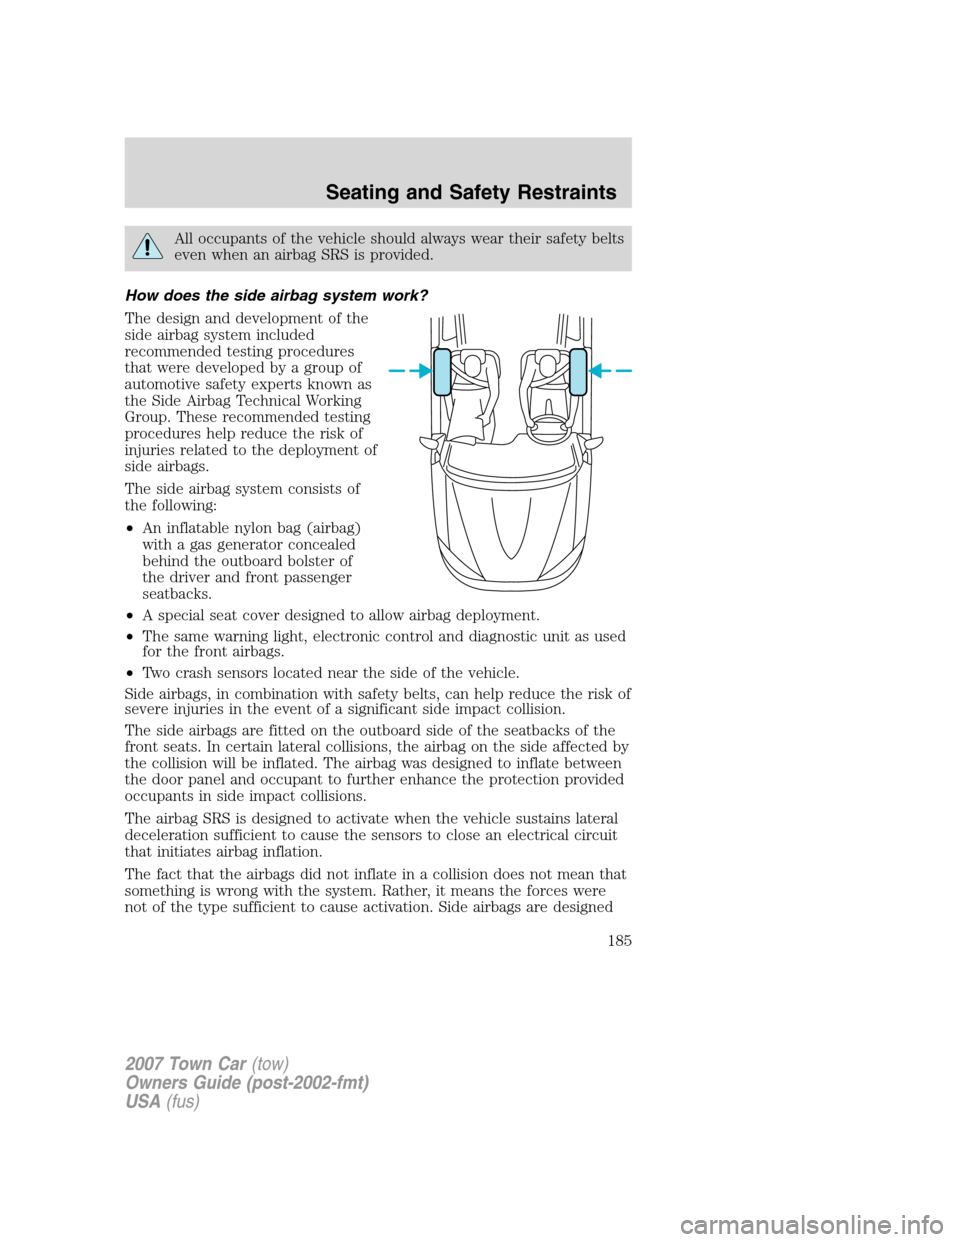 LINCOLN TOWN CAR 2007 User Guide All occupants of the vehicle should always wear their safety belts
even when an airbag SRS is provided.
How does the side airbag system work?
The design and development of the
side airbag system inclu